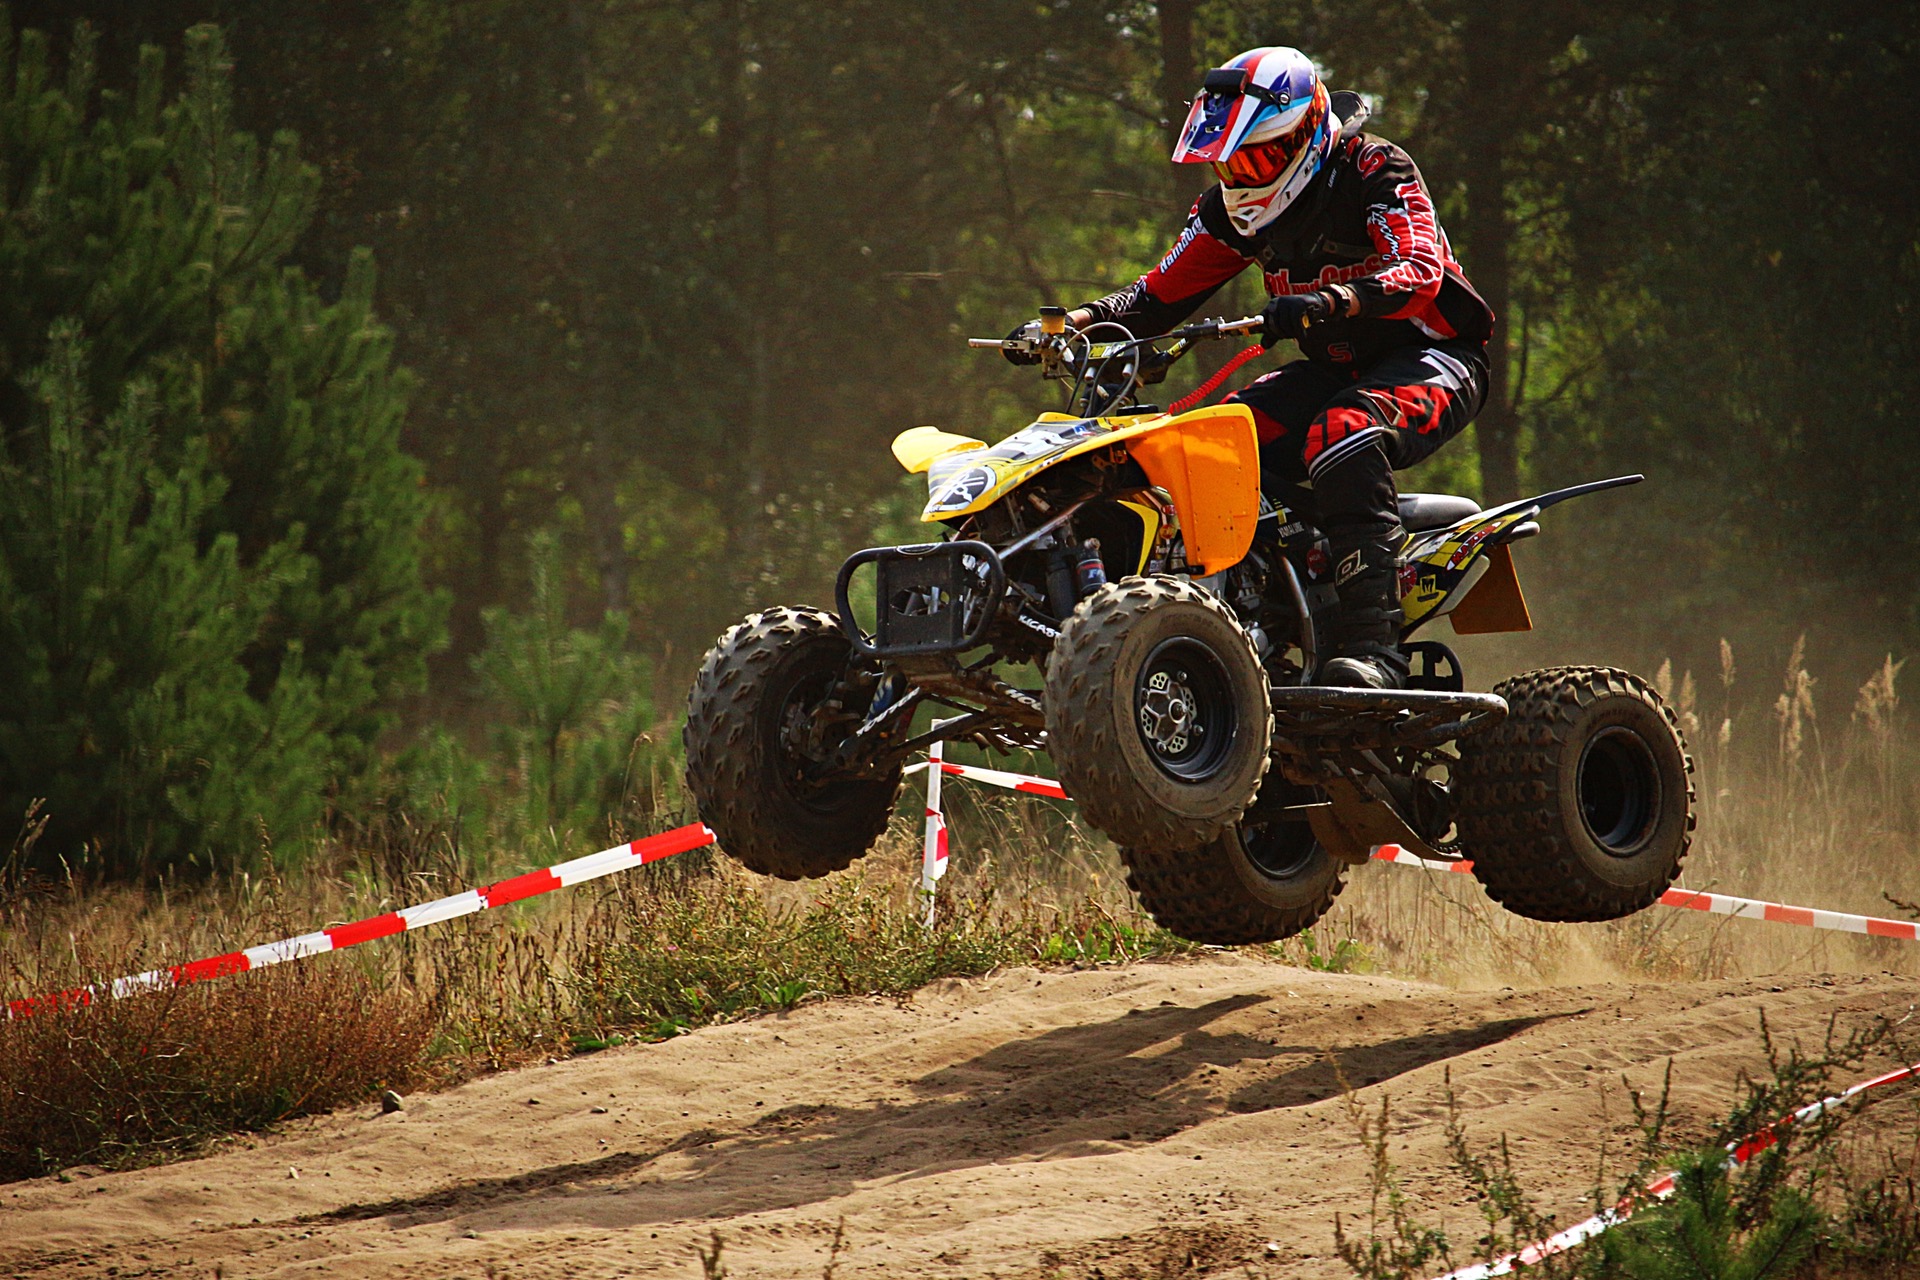 ATV jumping on the race road